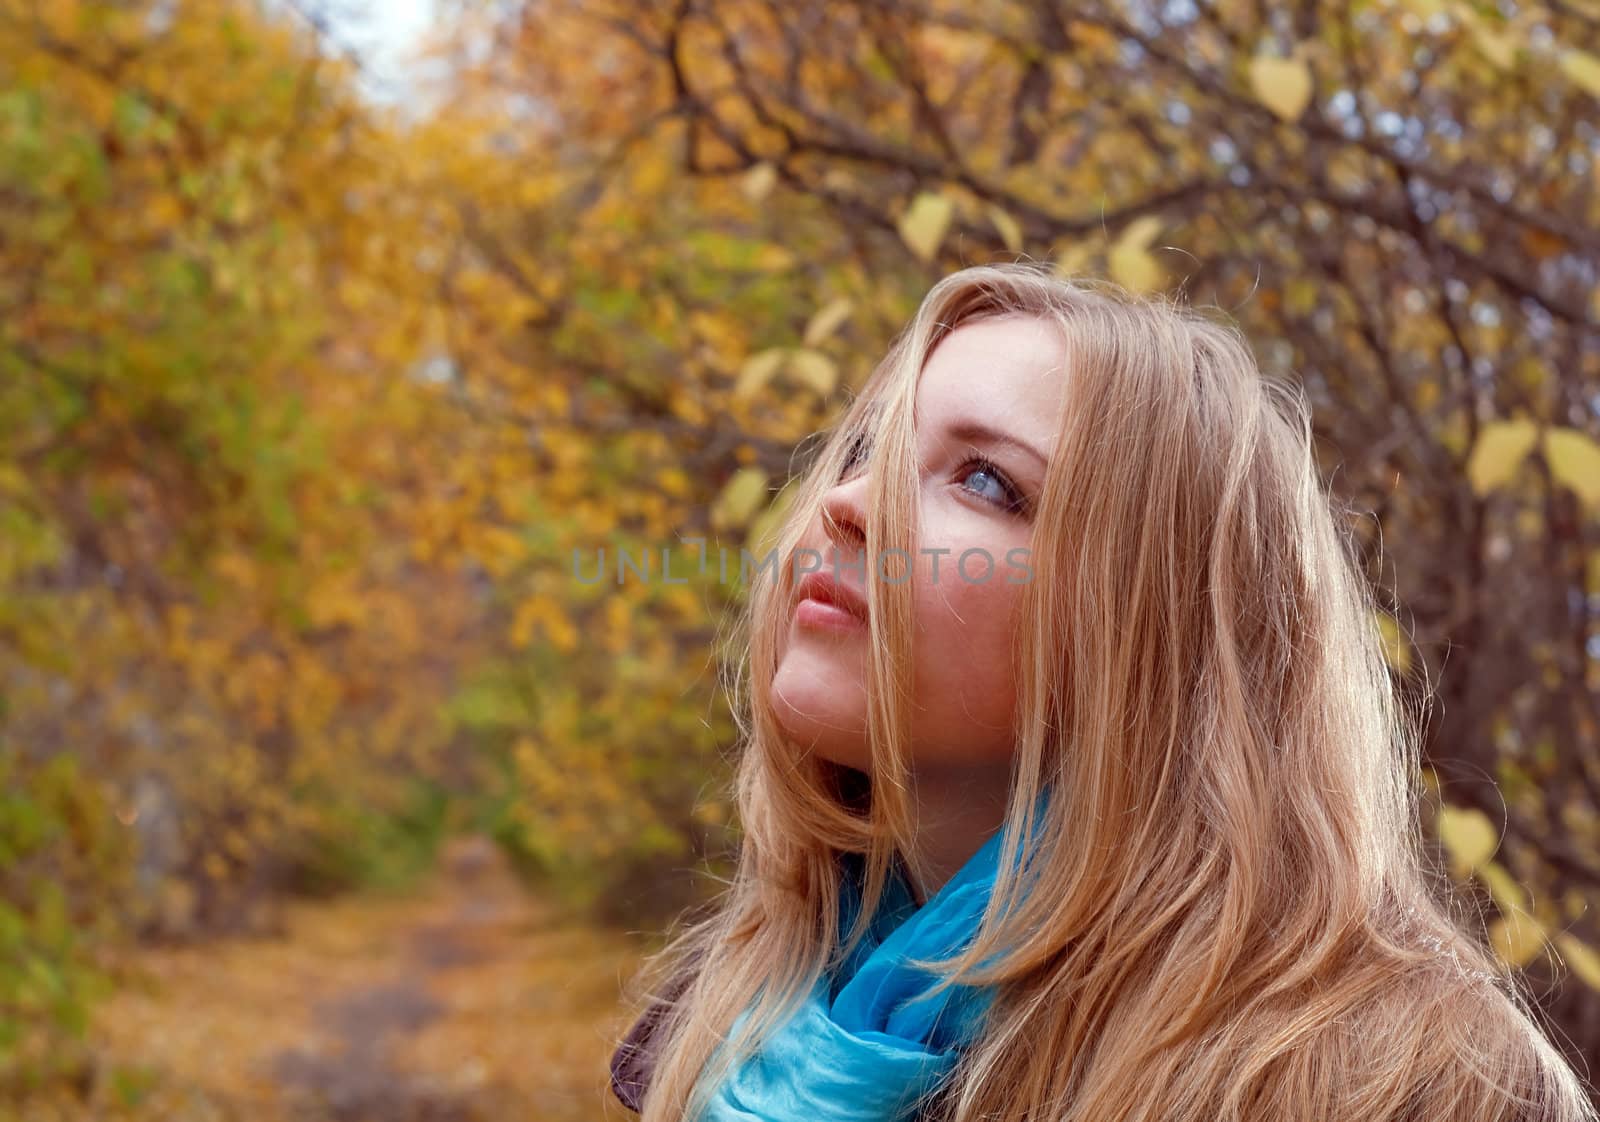 Young pretty blonde woman in the autumn park